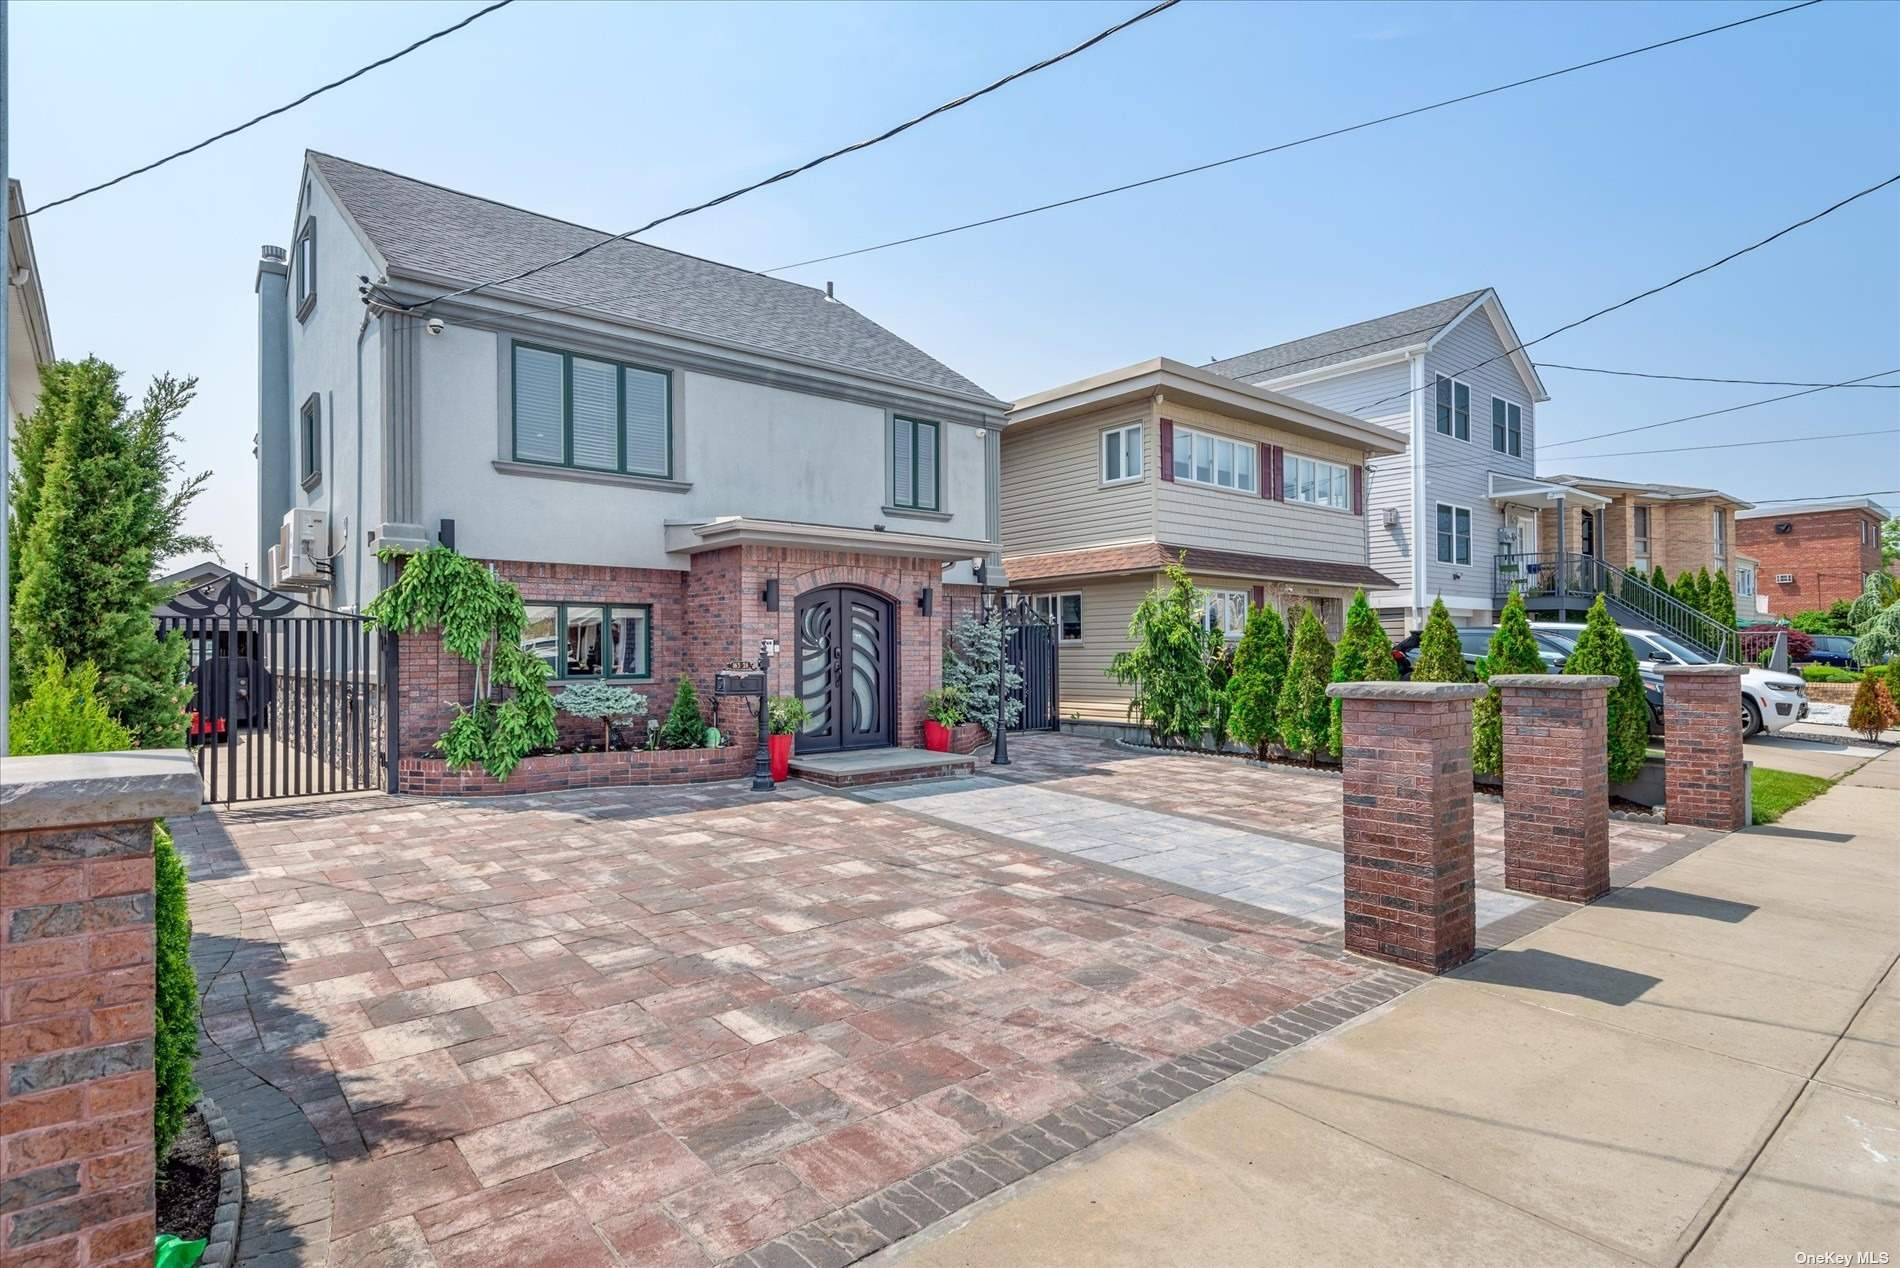 Introducing a beautiful waterfront property on 95th street for sale in the heart of Howard Beach.